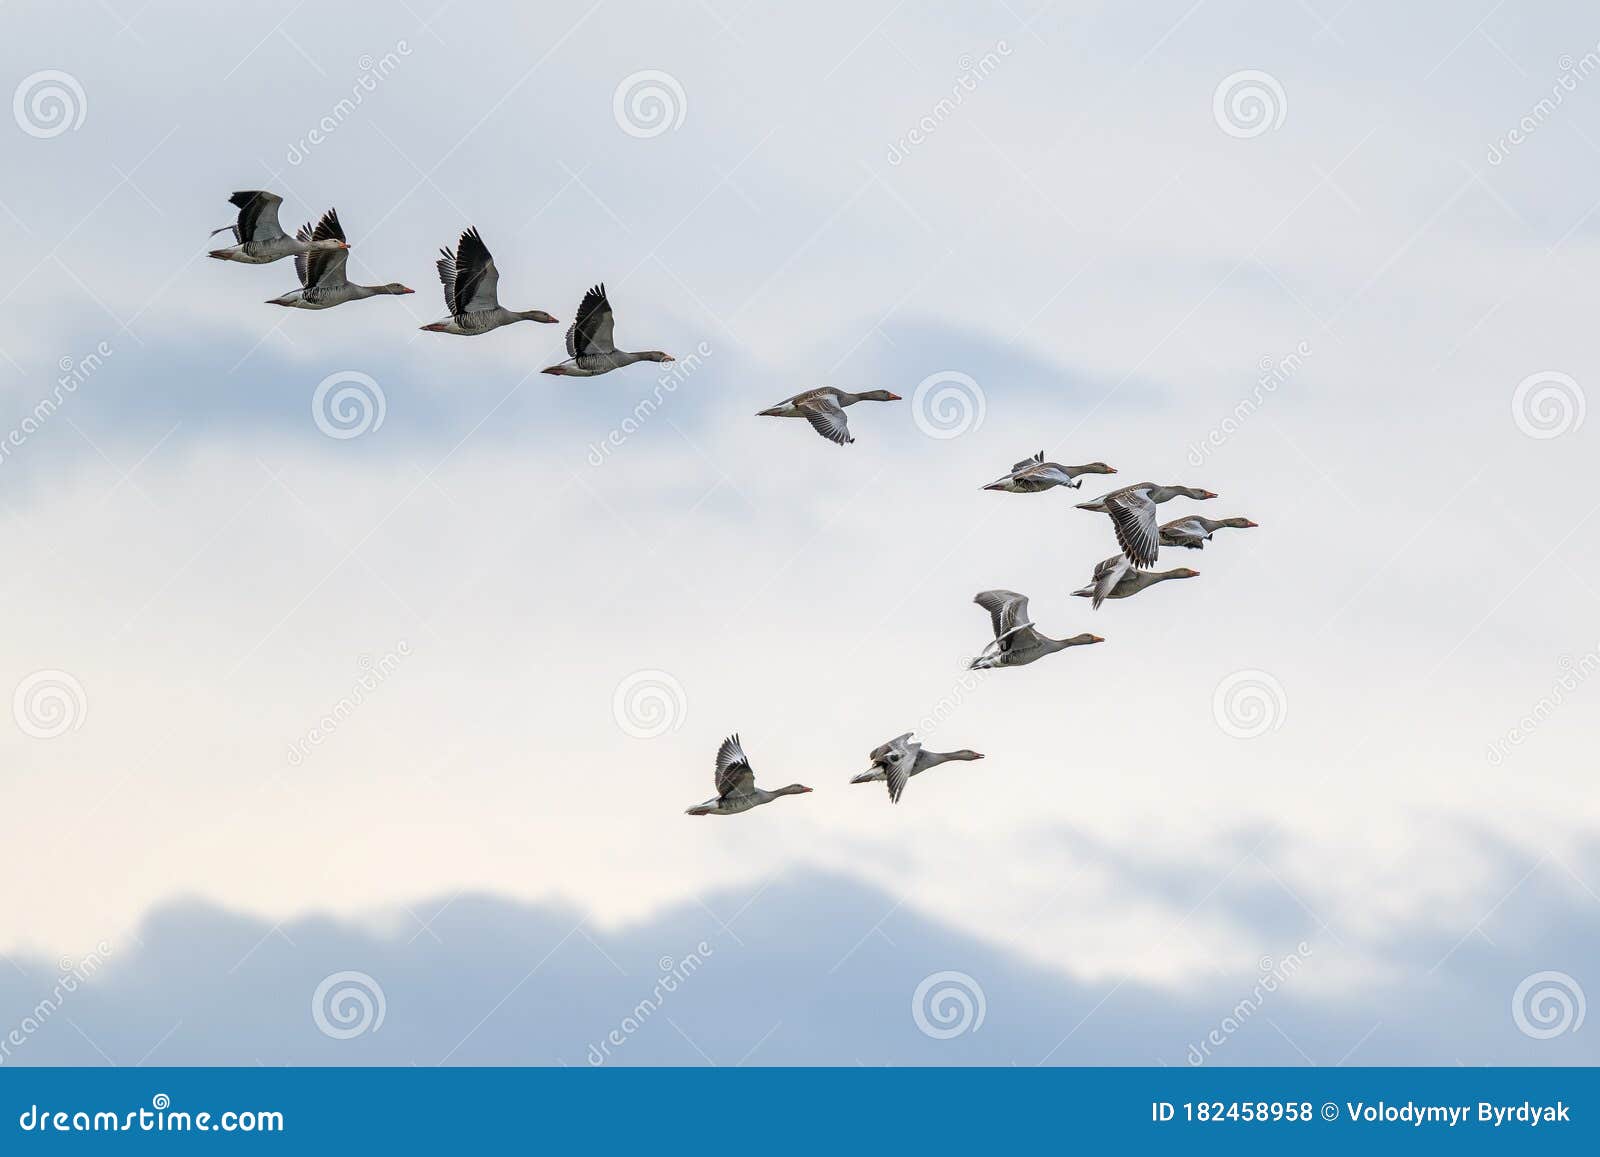 migrating geese flying in v formation